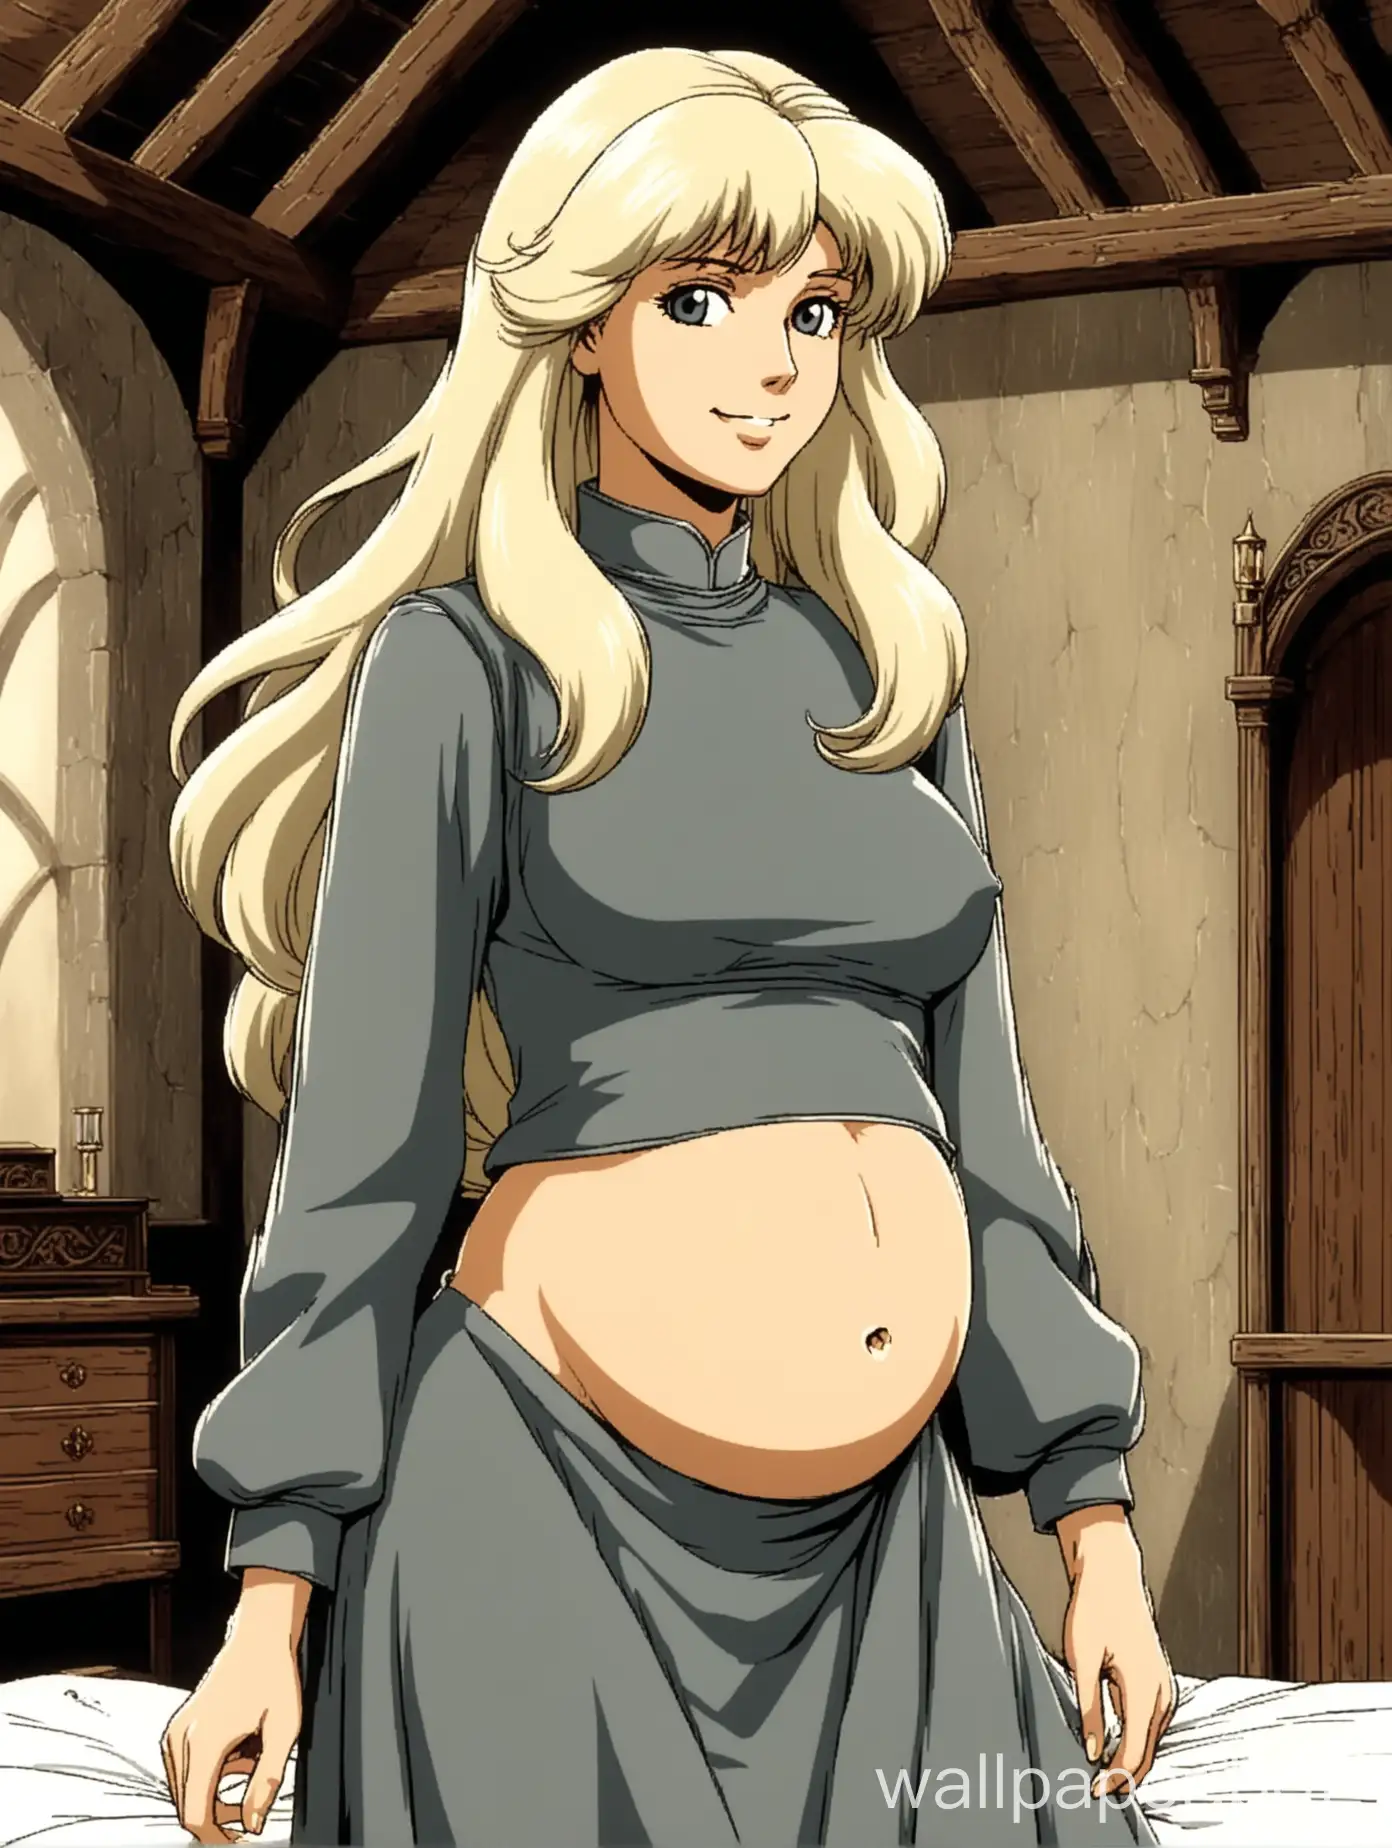 Pregnant-Medieval-Elegance-Young-Woman-in-1980s-Retro-Anime-Style